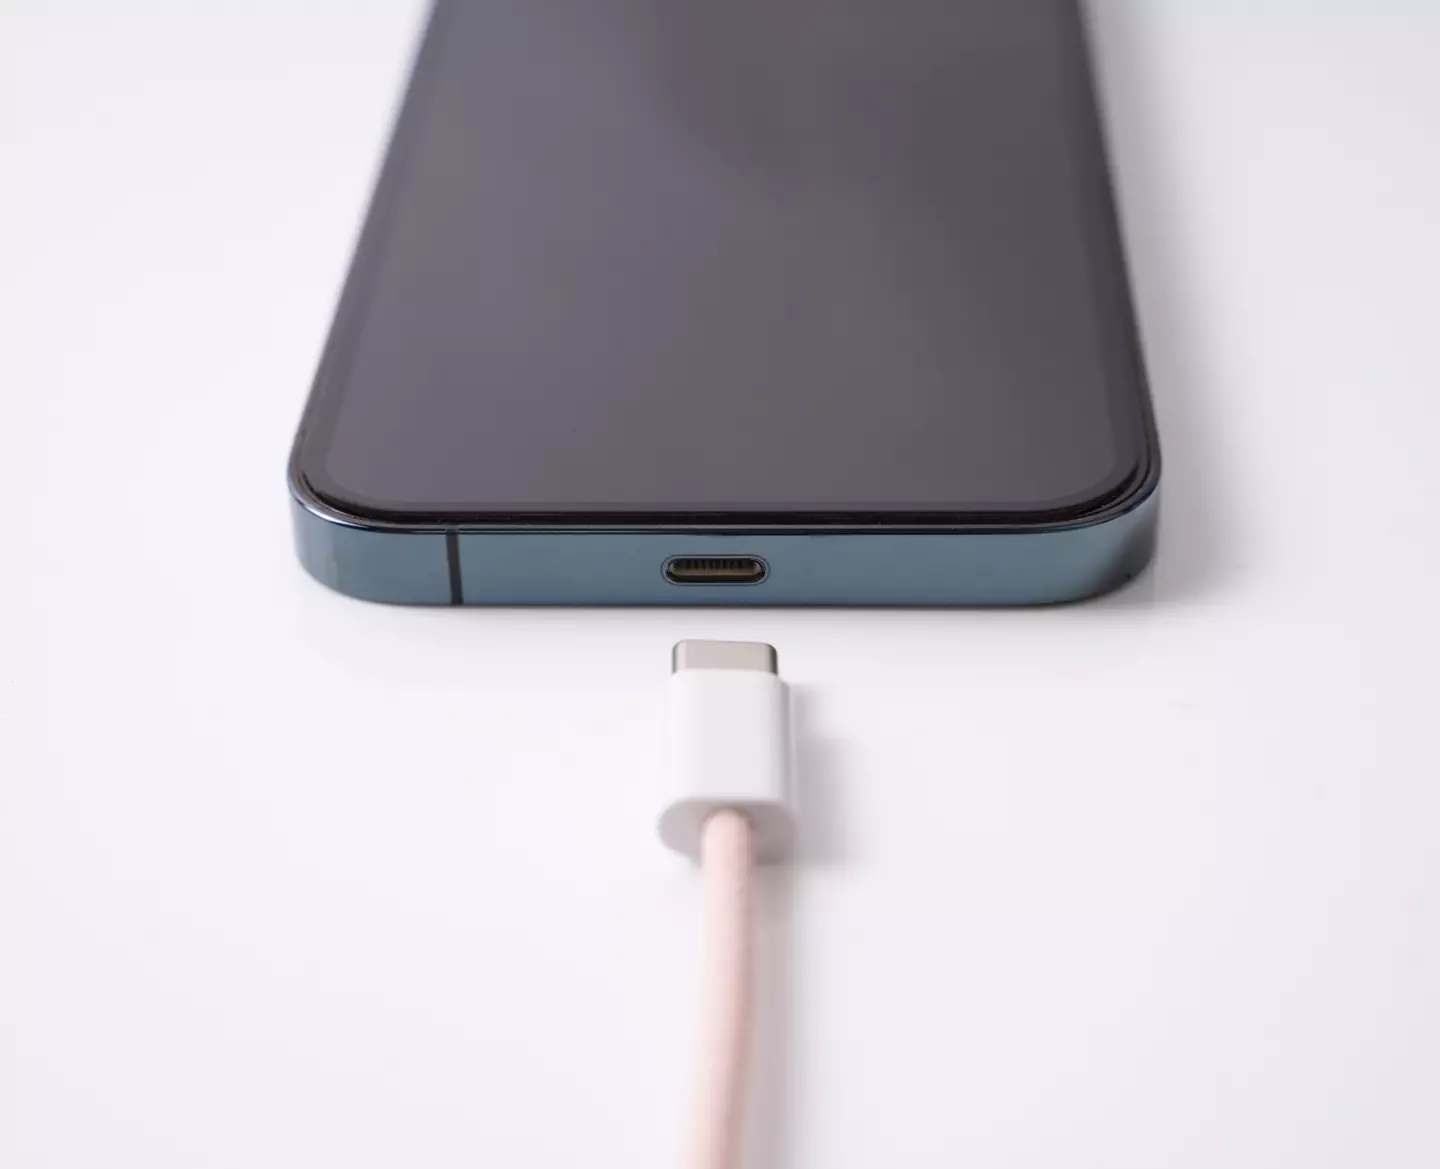 A new hack for charging your iPhone has gone viral.